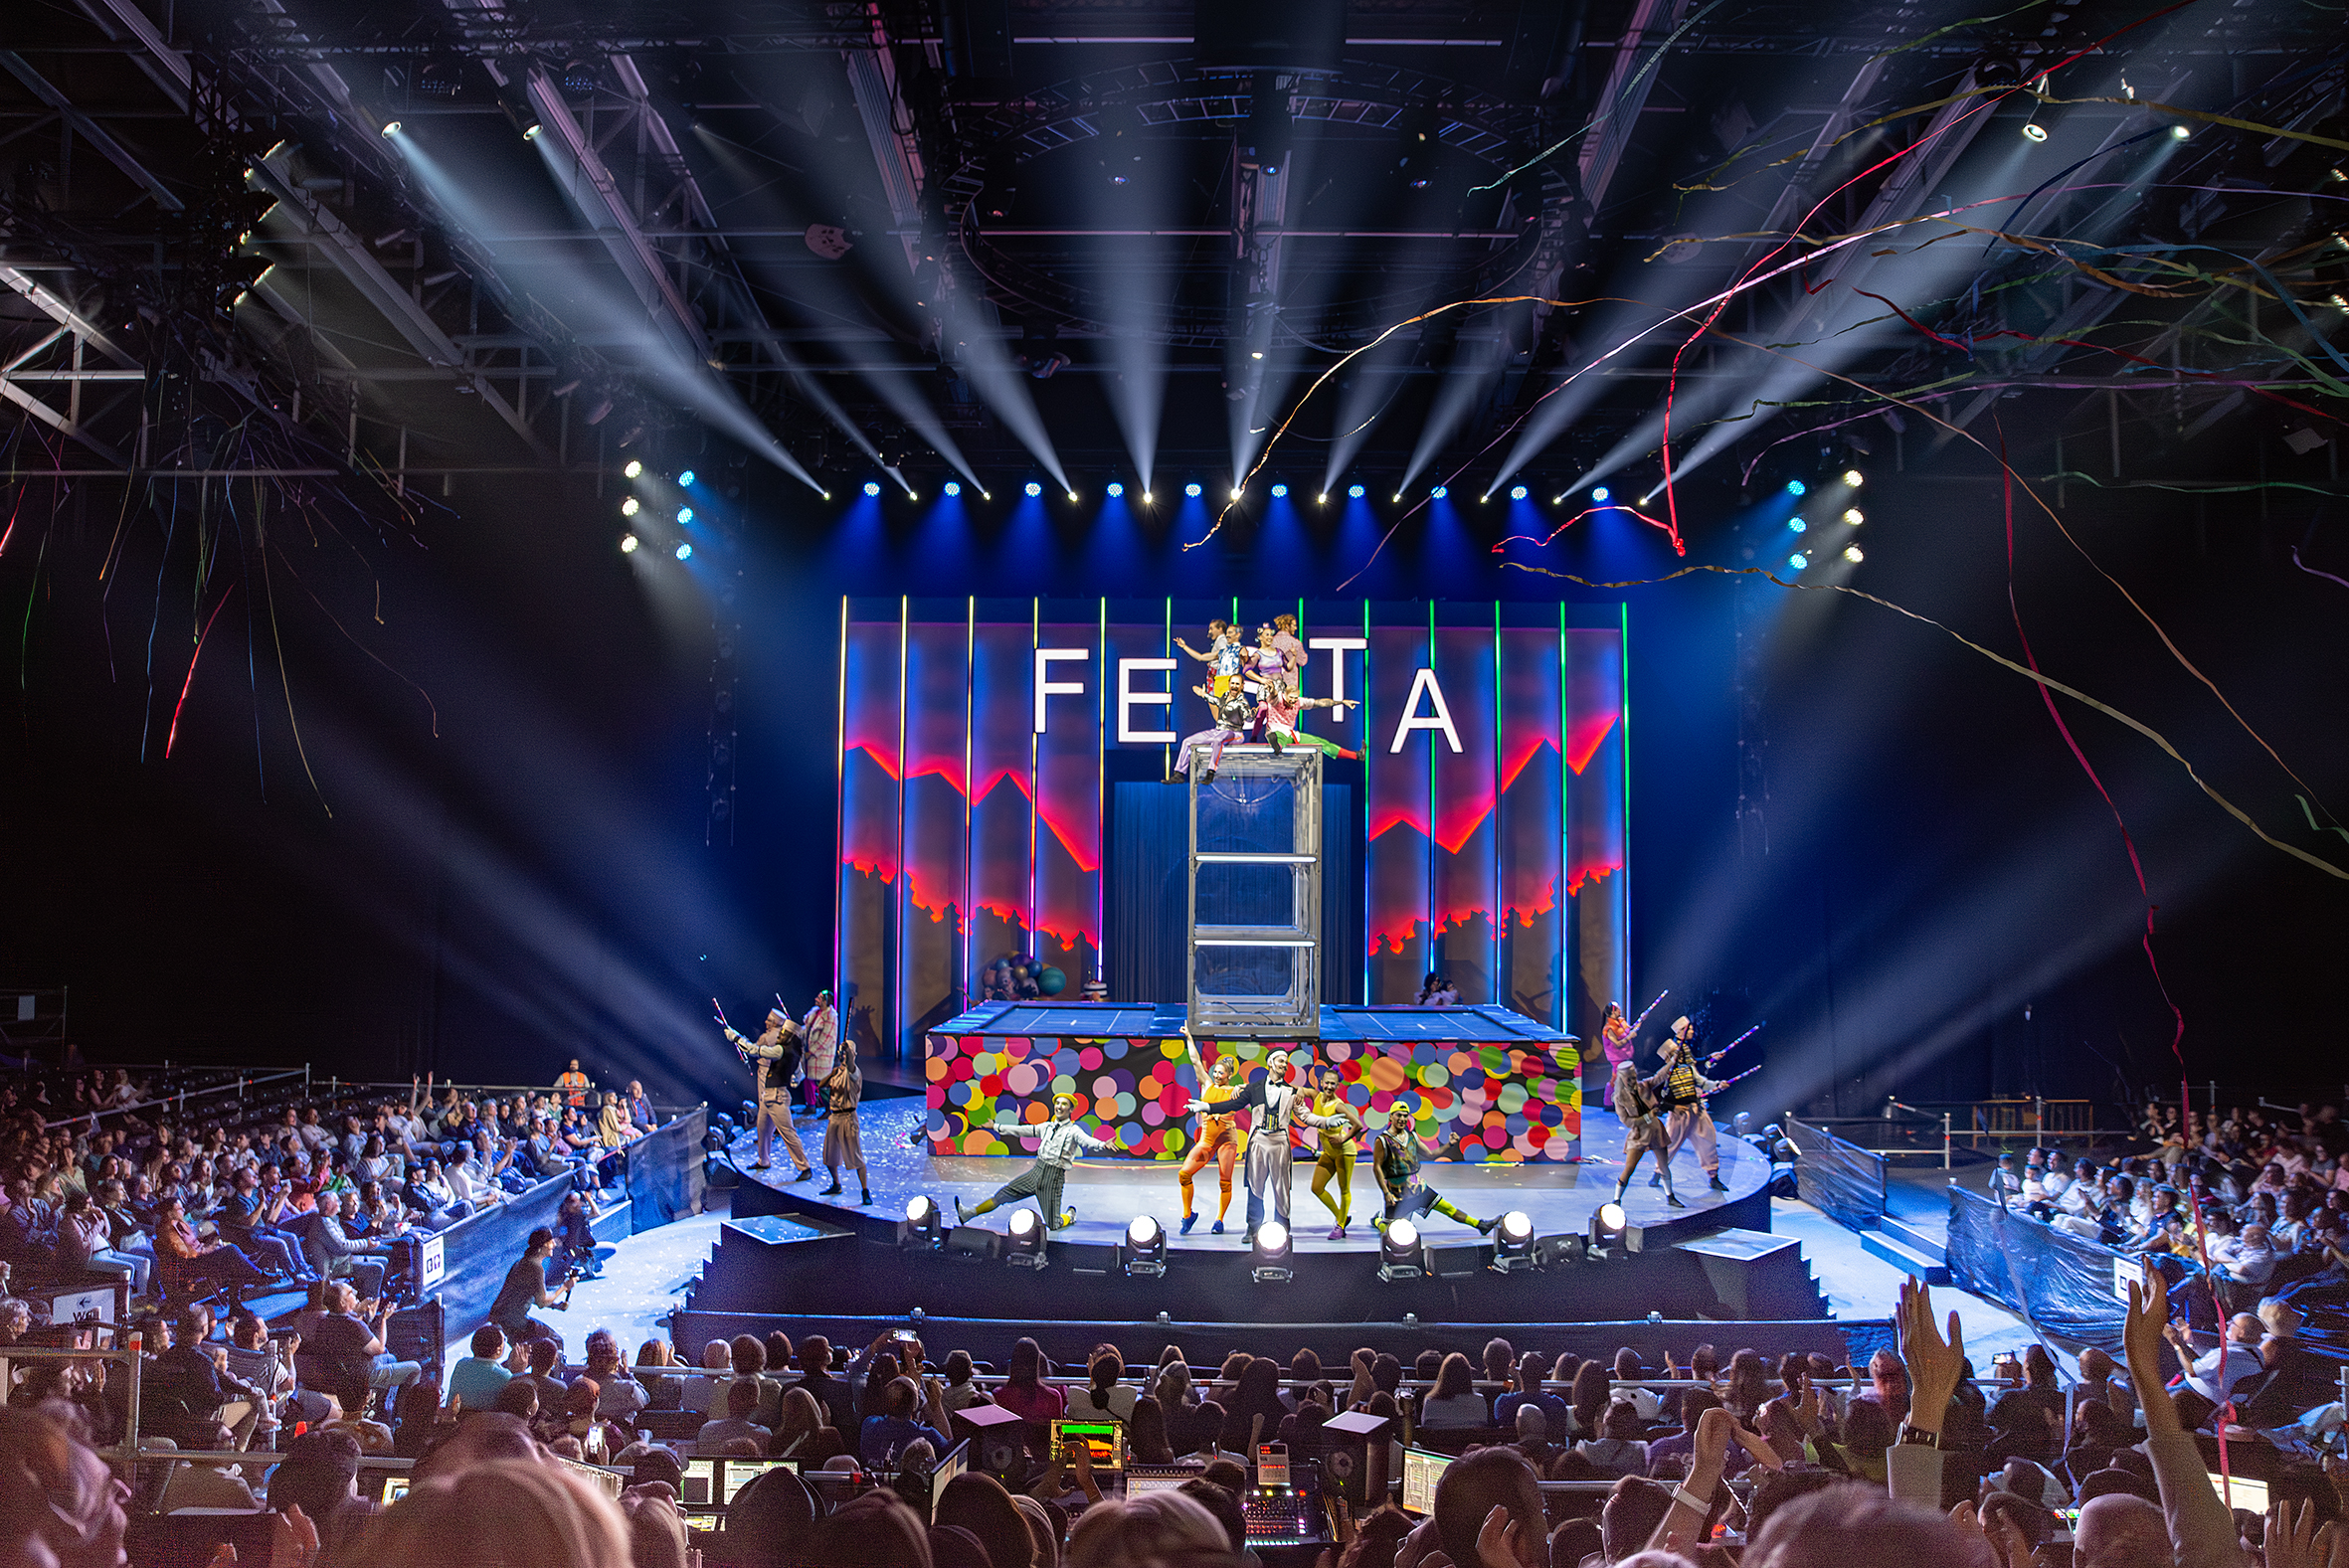 PRG is delighted to be working with Cirque du Soleil and their new show with Rigging, Audio and Lighting Technology.